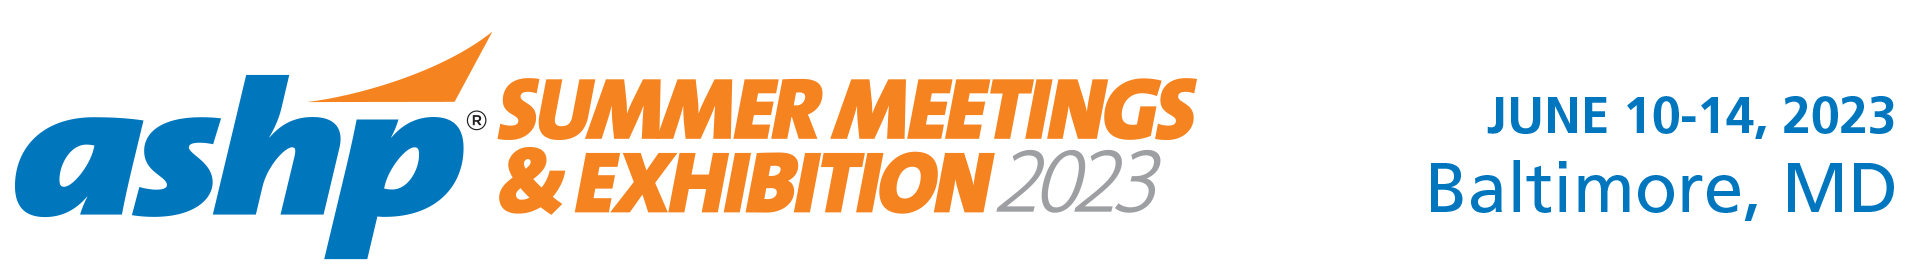  2023 Summer Meetings & Exhibition Event Banner